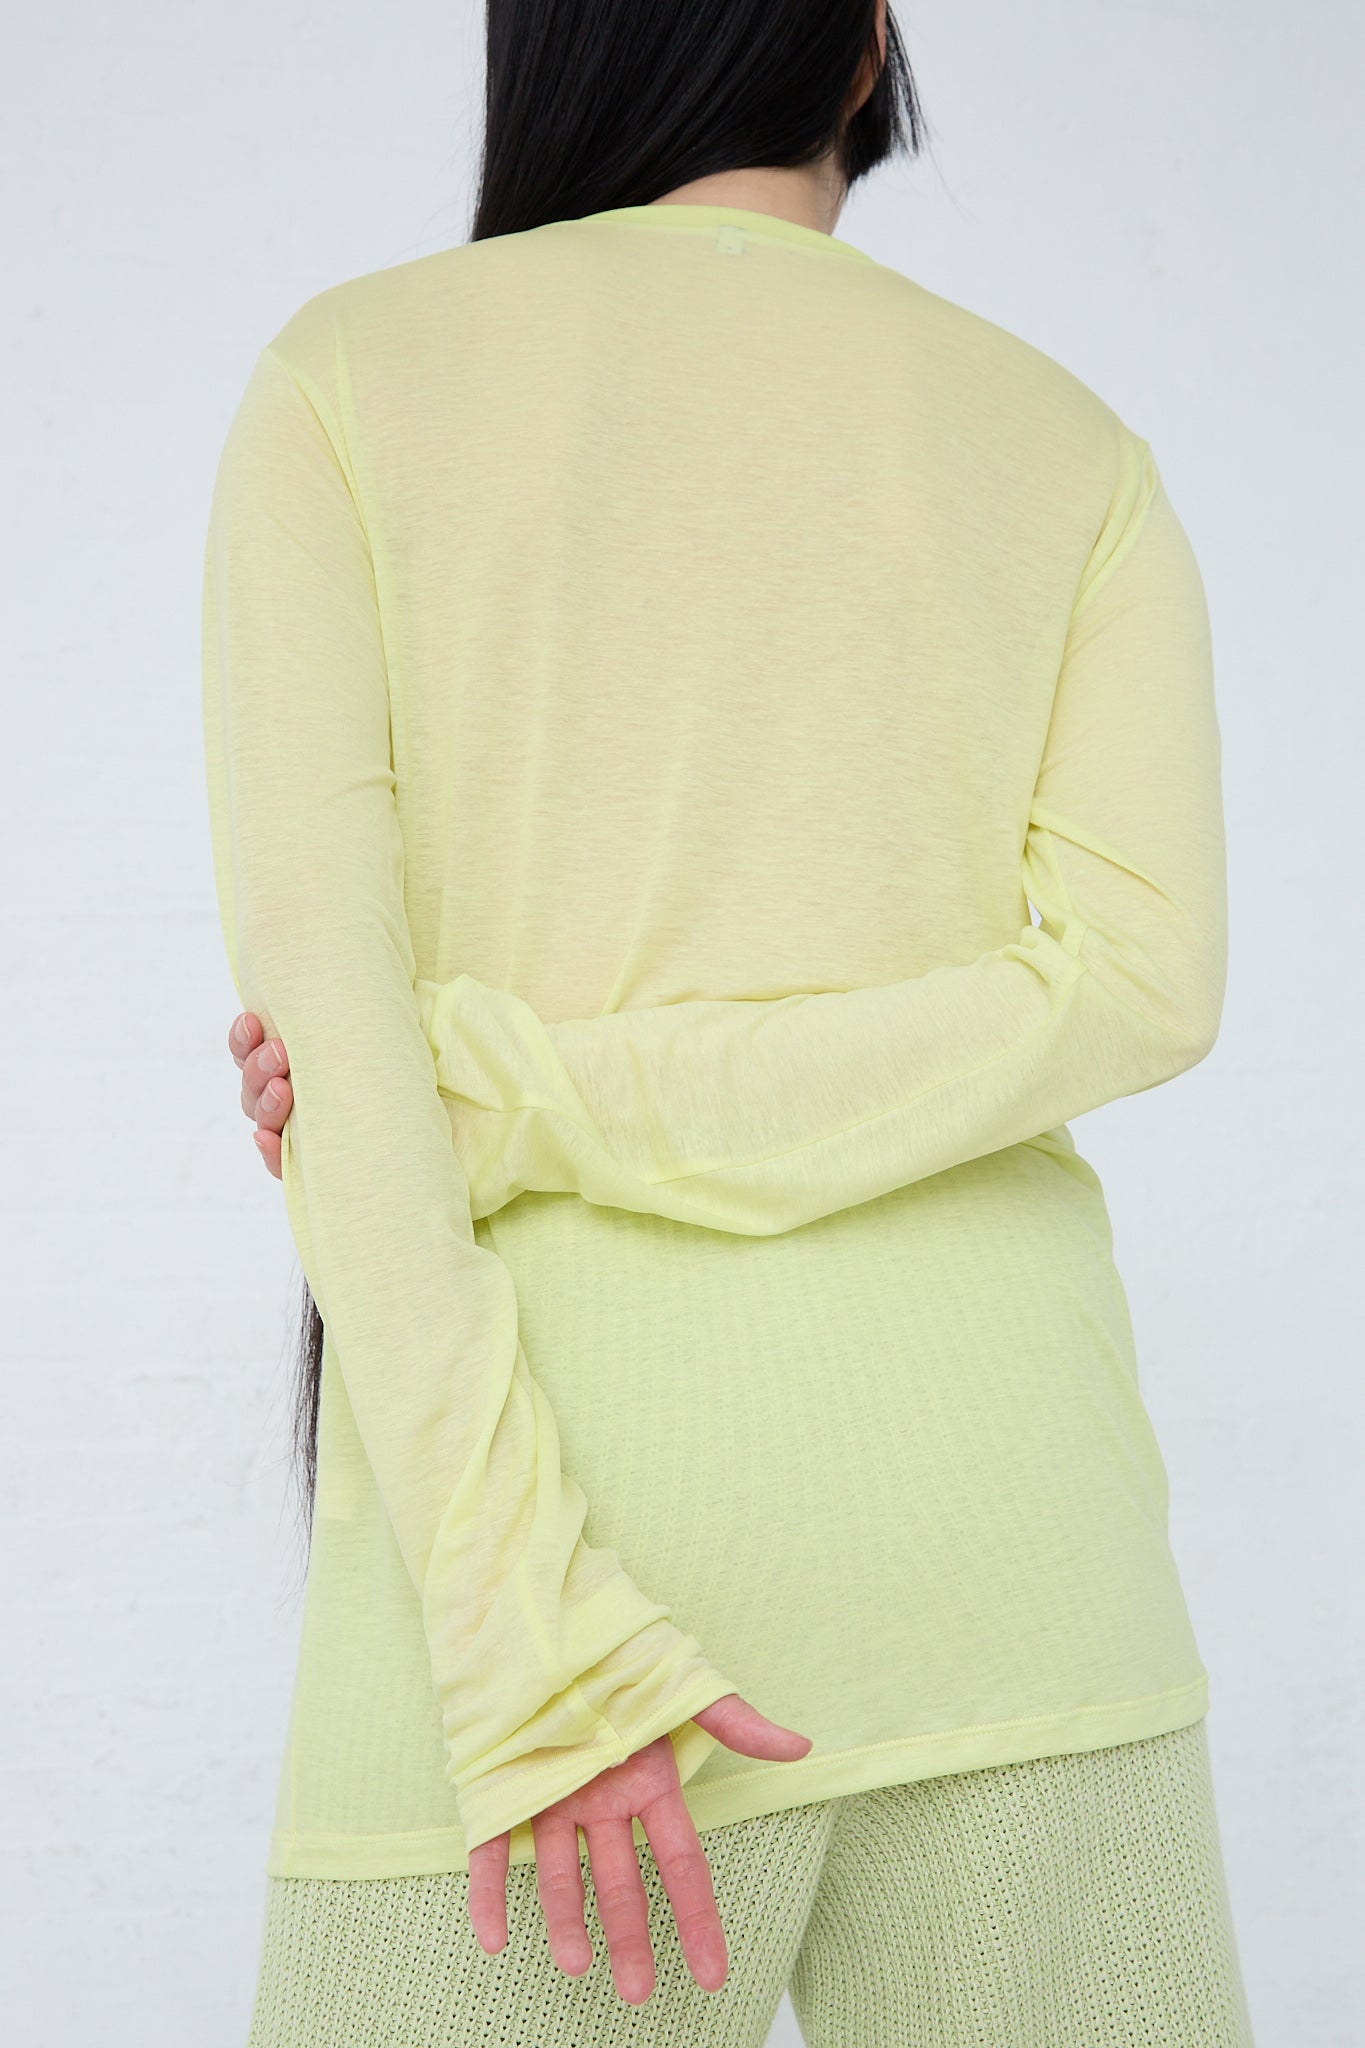 The back view of a woman wearing a Baserange Bamboo Long Sleeve Tee in Lime.